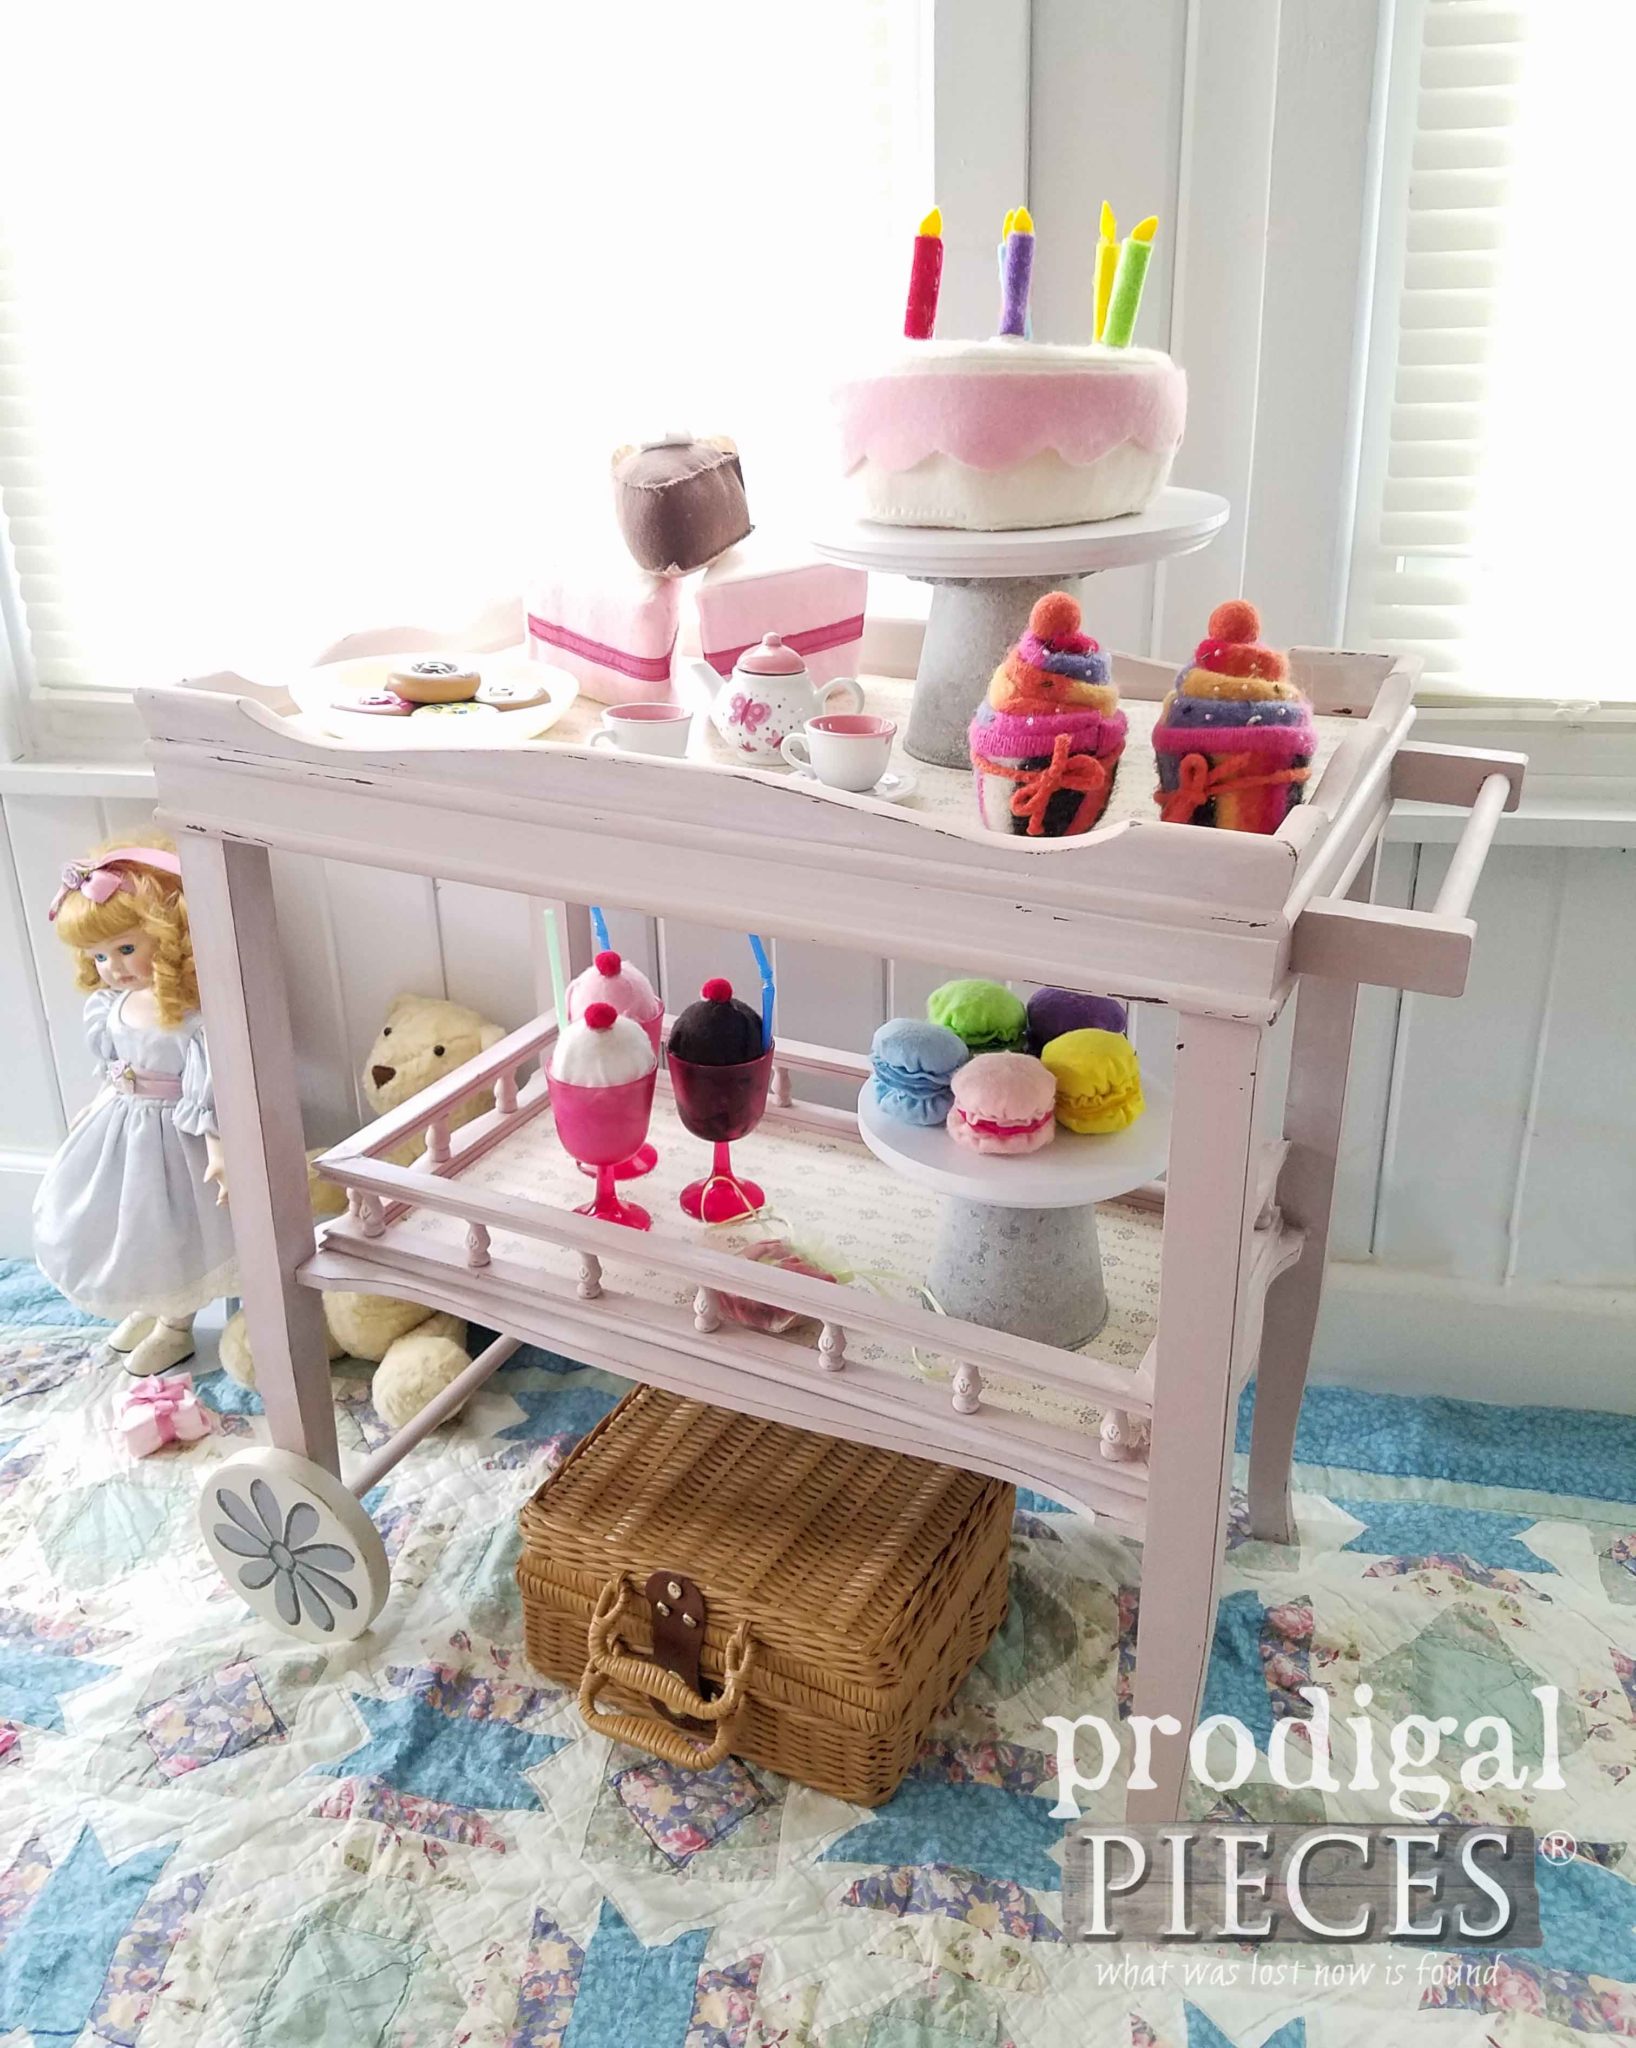 Sweet Pink Tea Cart with Handmade Food and Accessories by Larissa of Prodigal Pieces | prodigalpieces.com